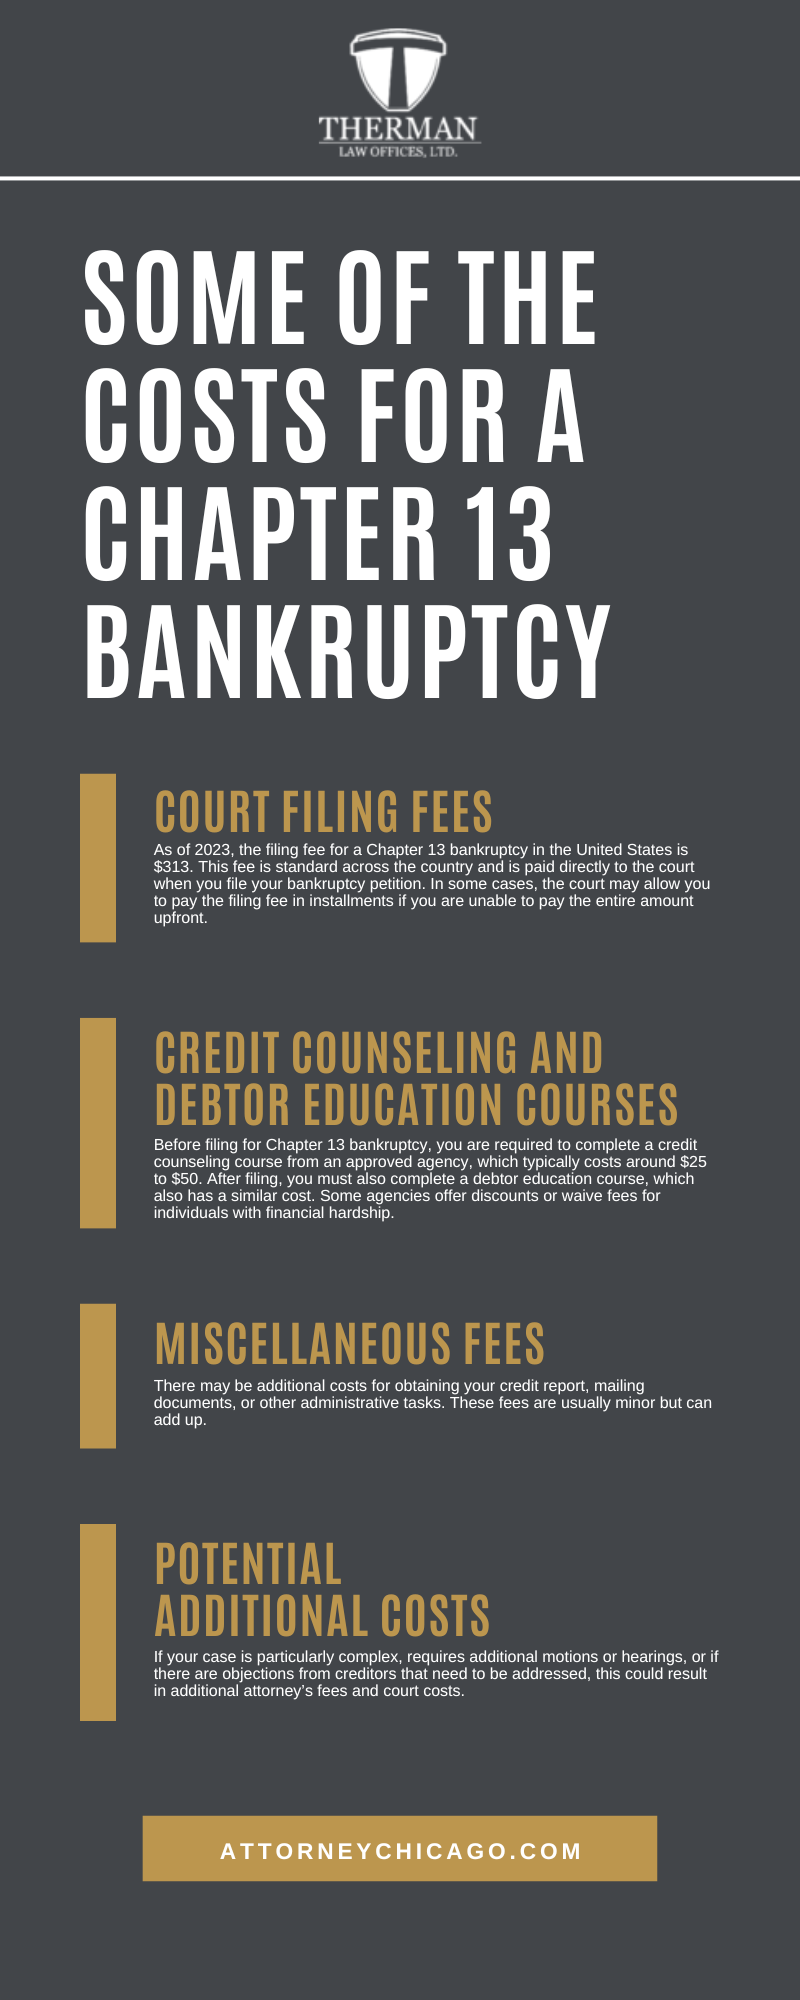 Some Of The Costs For A Chapter 13 Bankruptcy Infographic